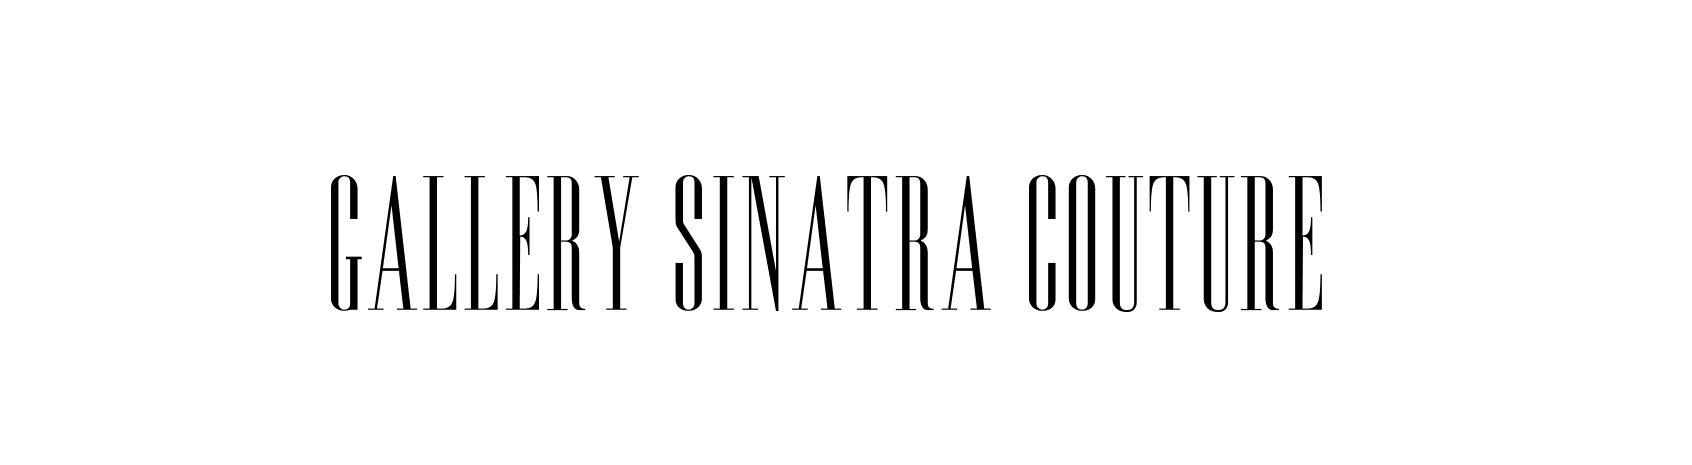 SinatraCouture 横幅